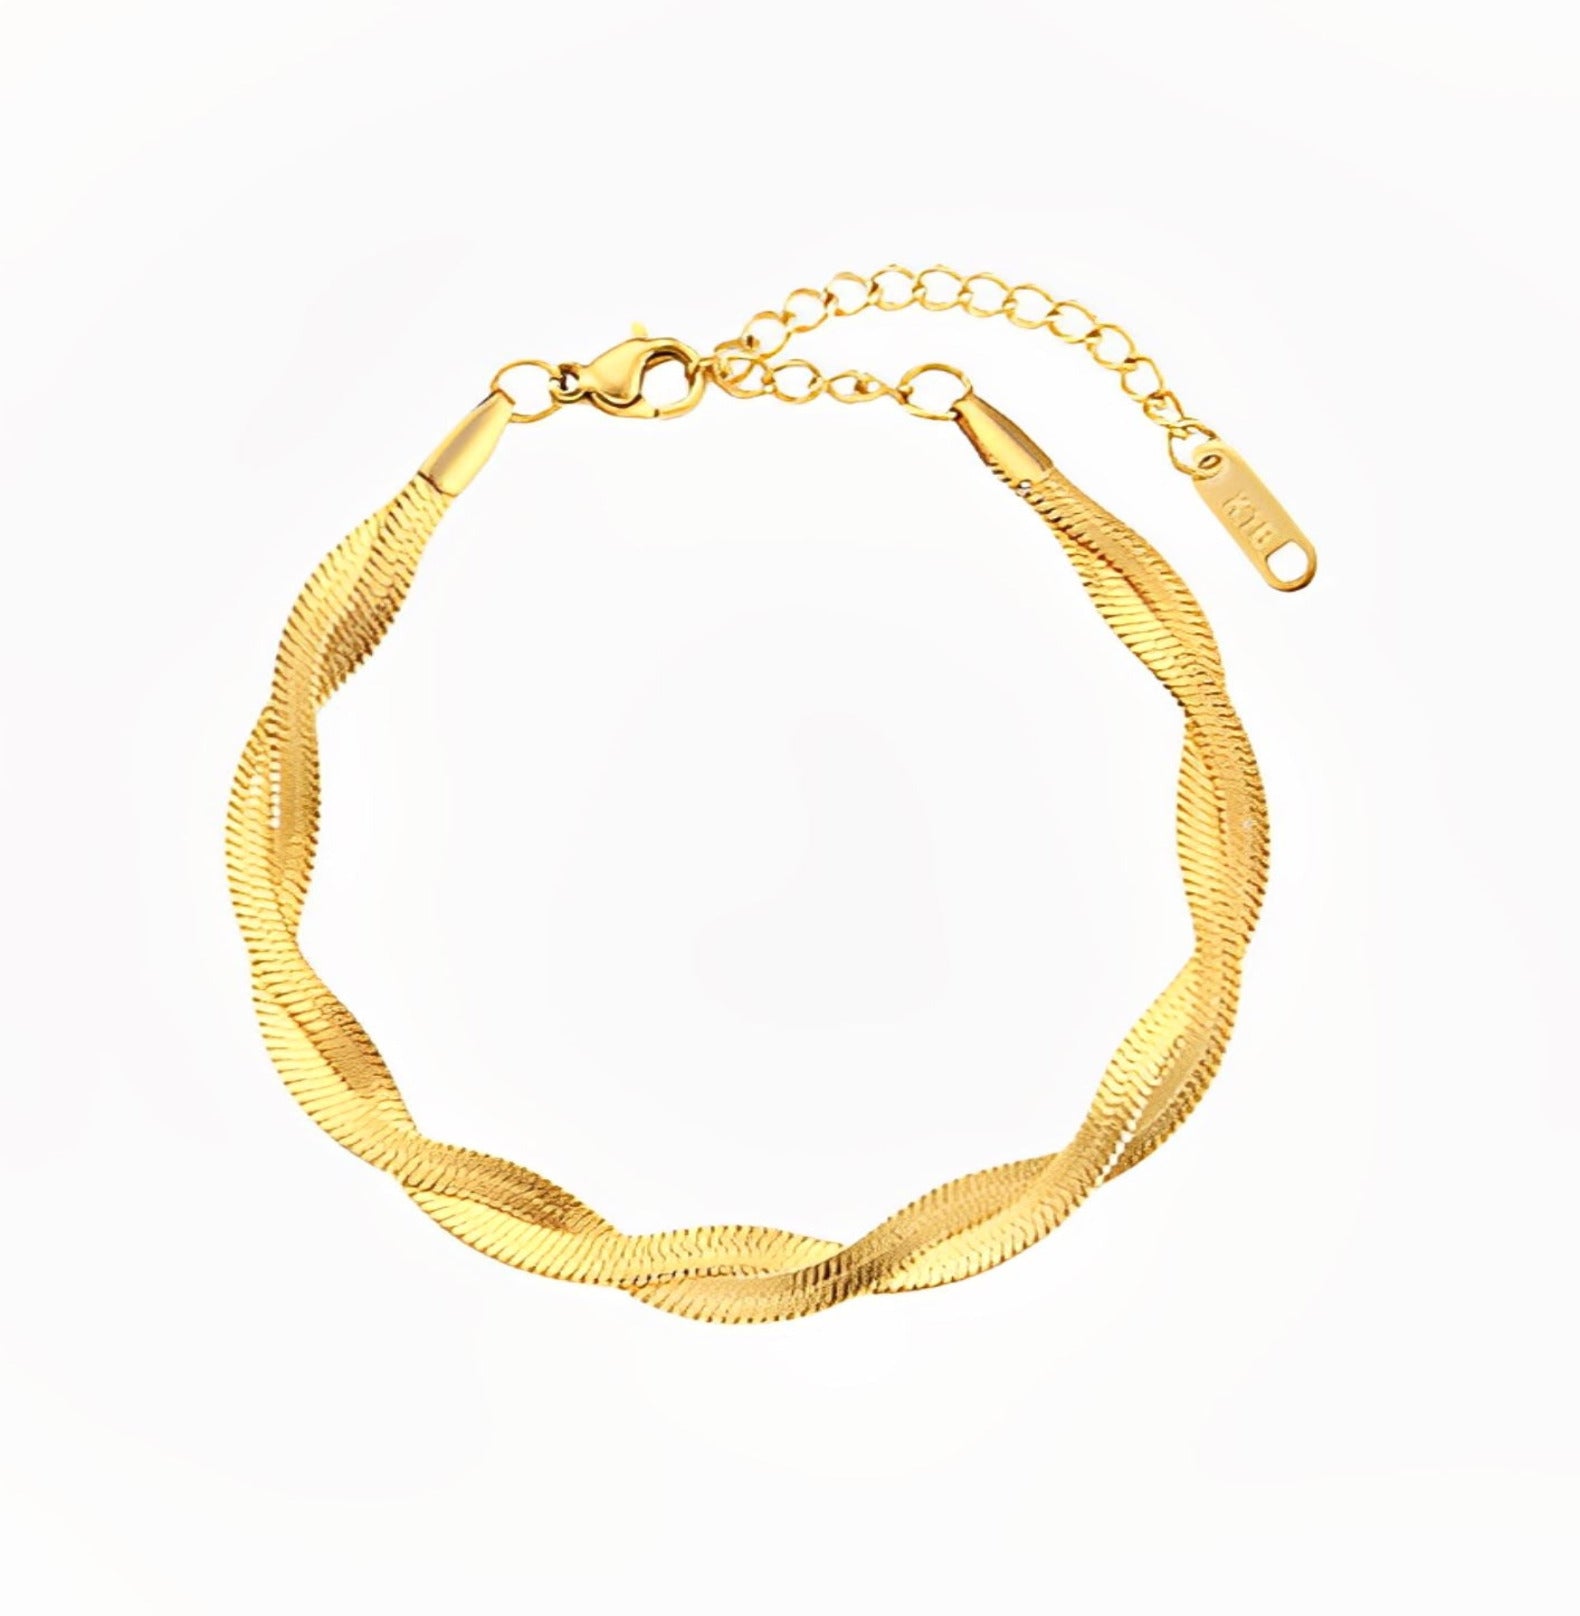 TWO SNAKE BRACELET braclet Yubama Jewelry Online Store - The Elegant Designs of Gold and Silver ! 